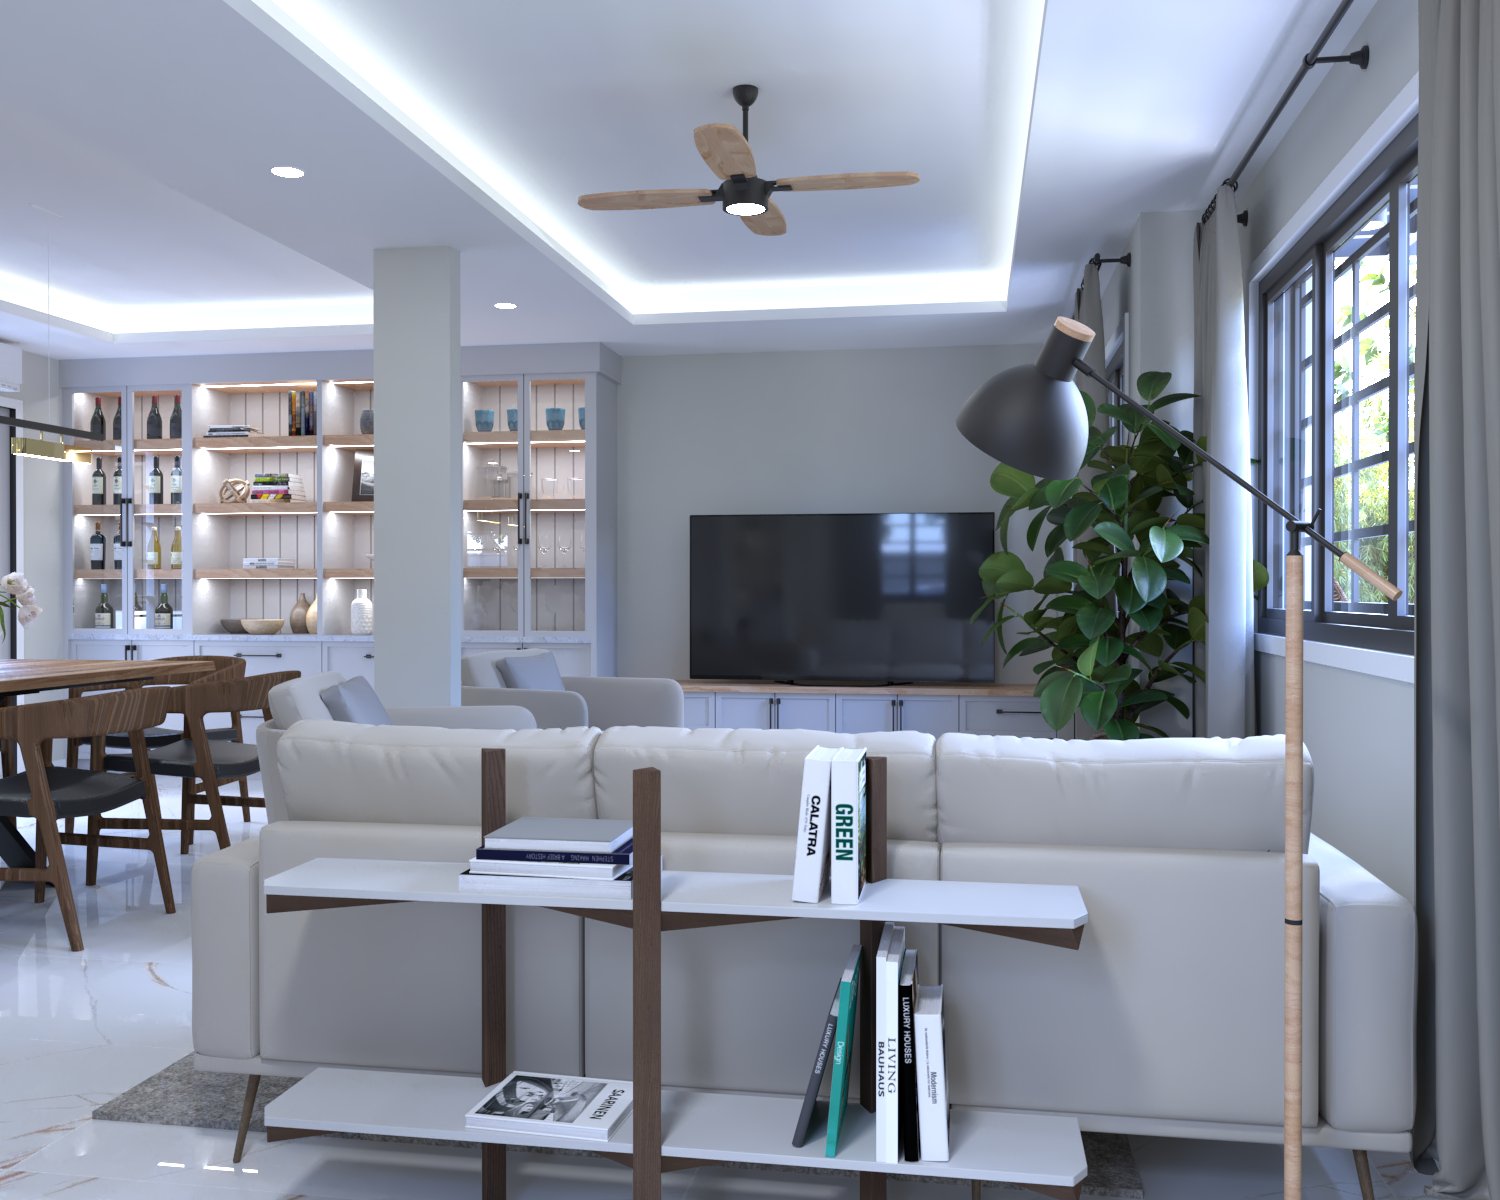 living area showing modern farmhouse concept with white walls, coved ceiling and clean looking modern furniture pieces